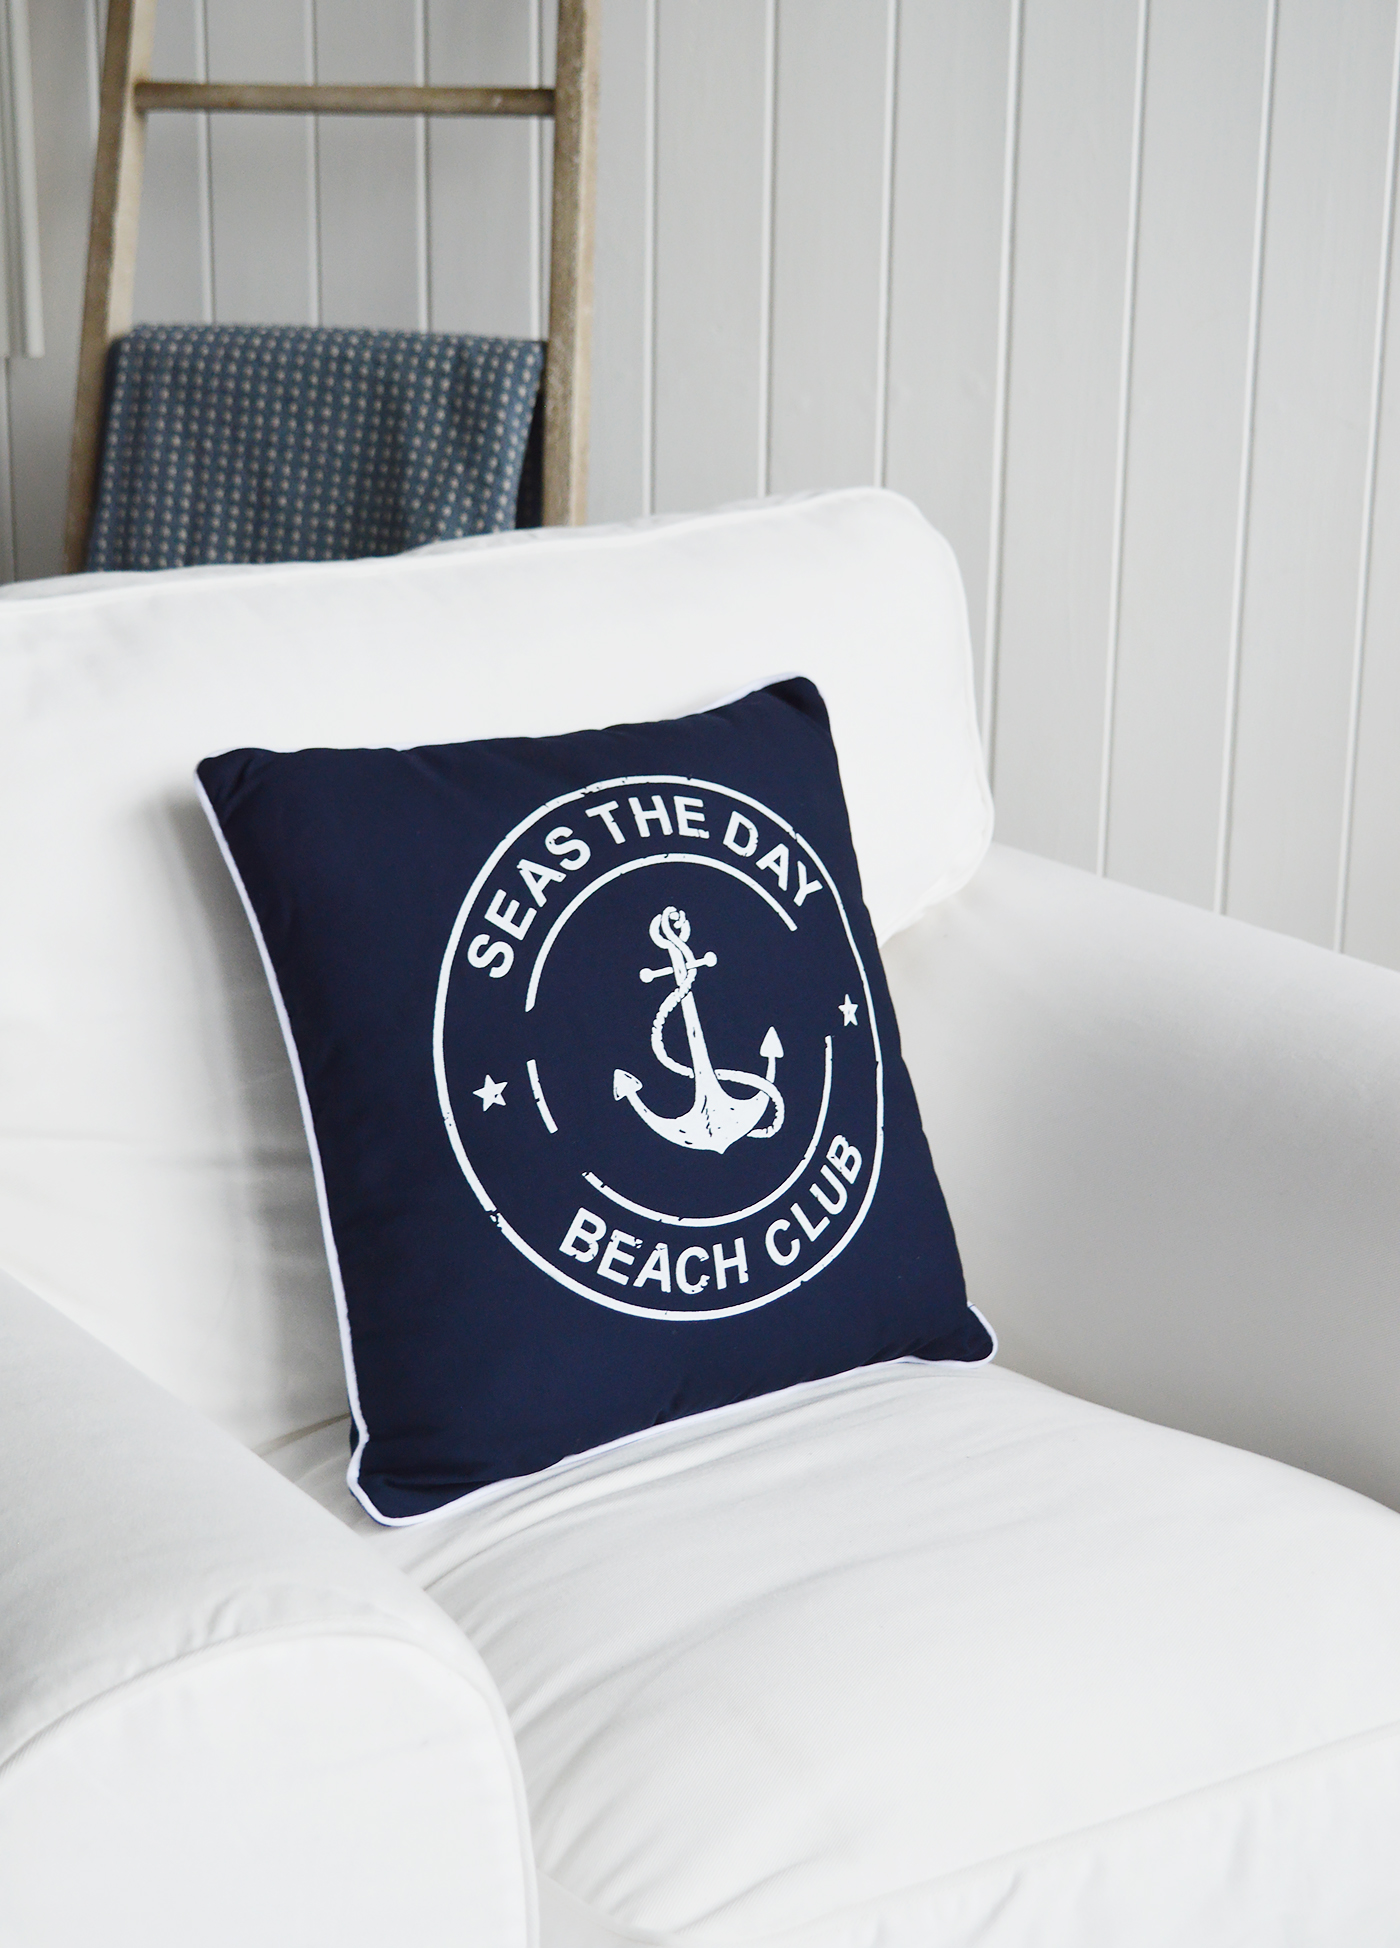 Navy and White Beach Club cushion with inner for coastal New England homes and interiors by the sea